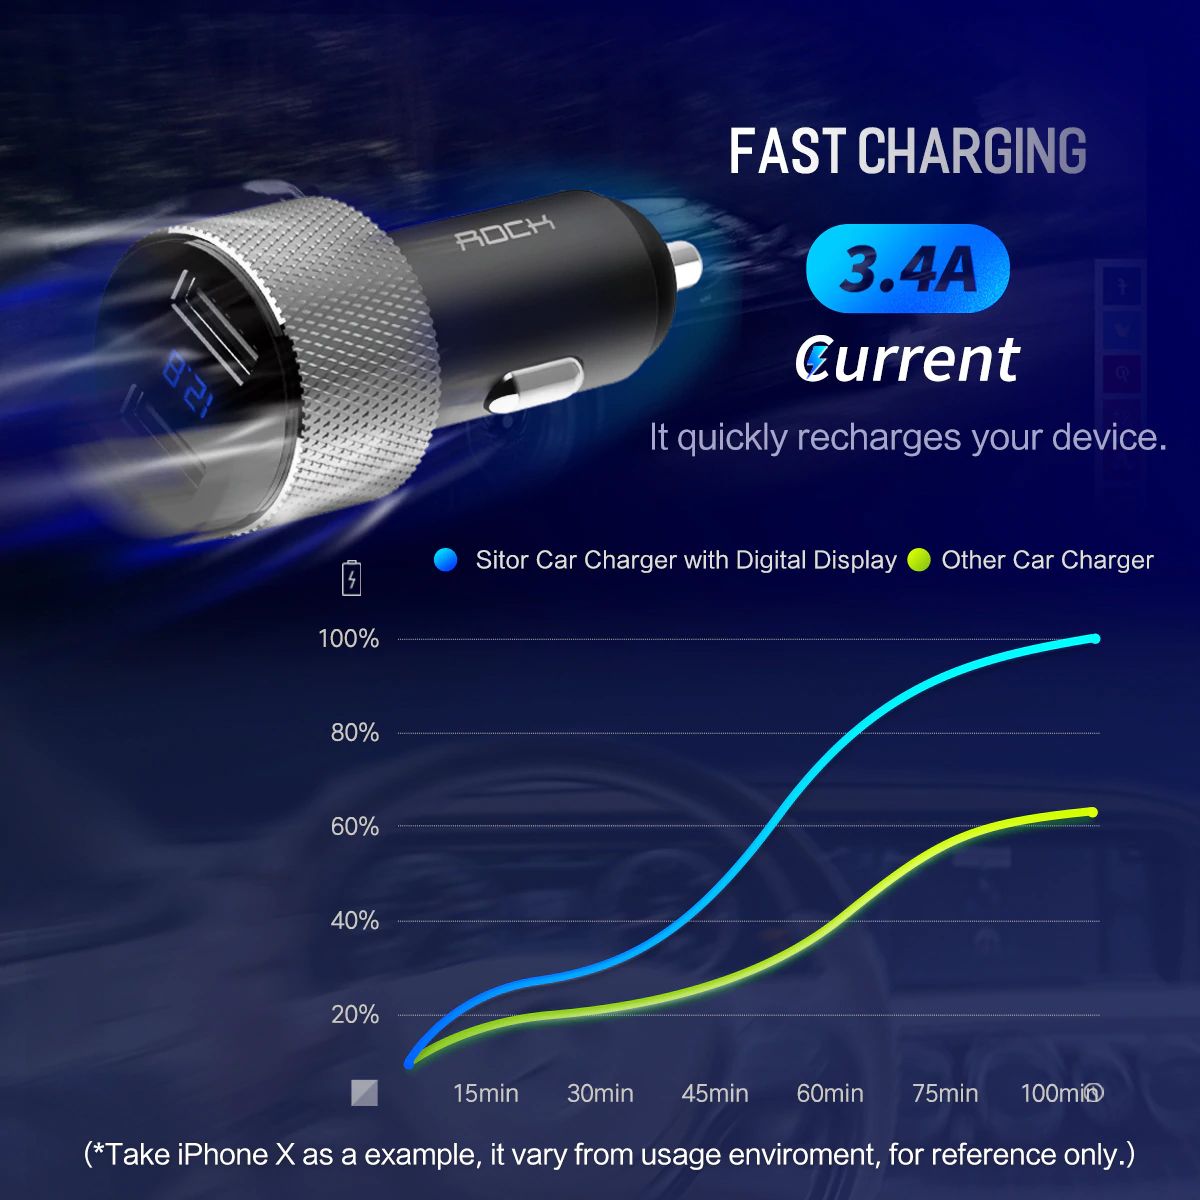 Rock Sitor Car Charger With Digital Display (17)